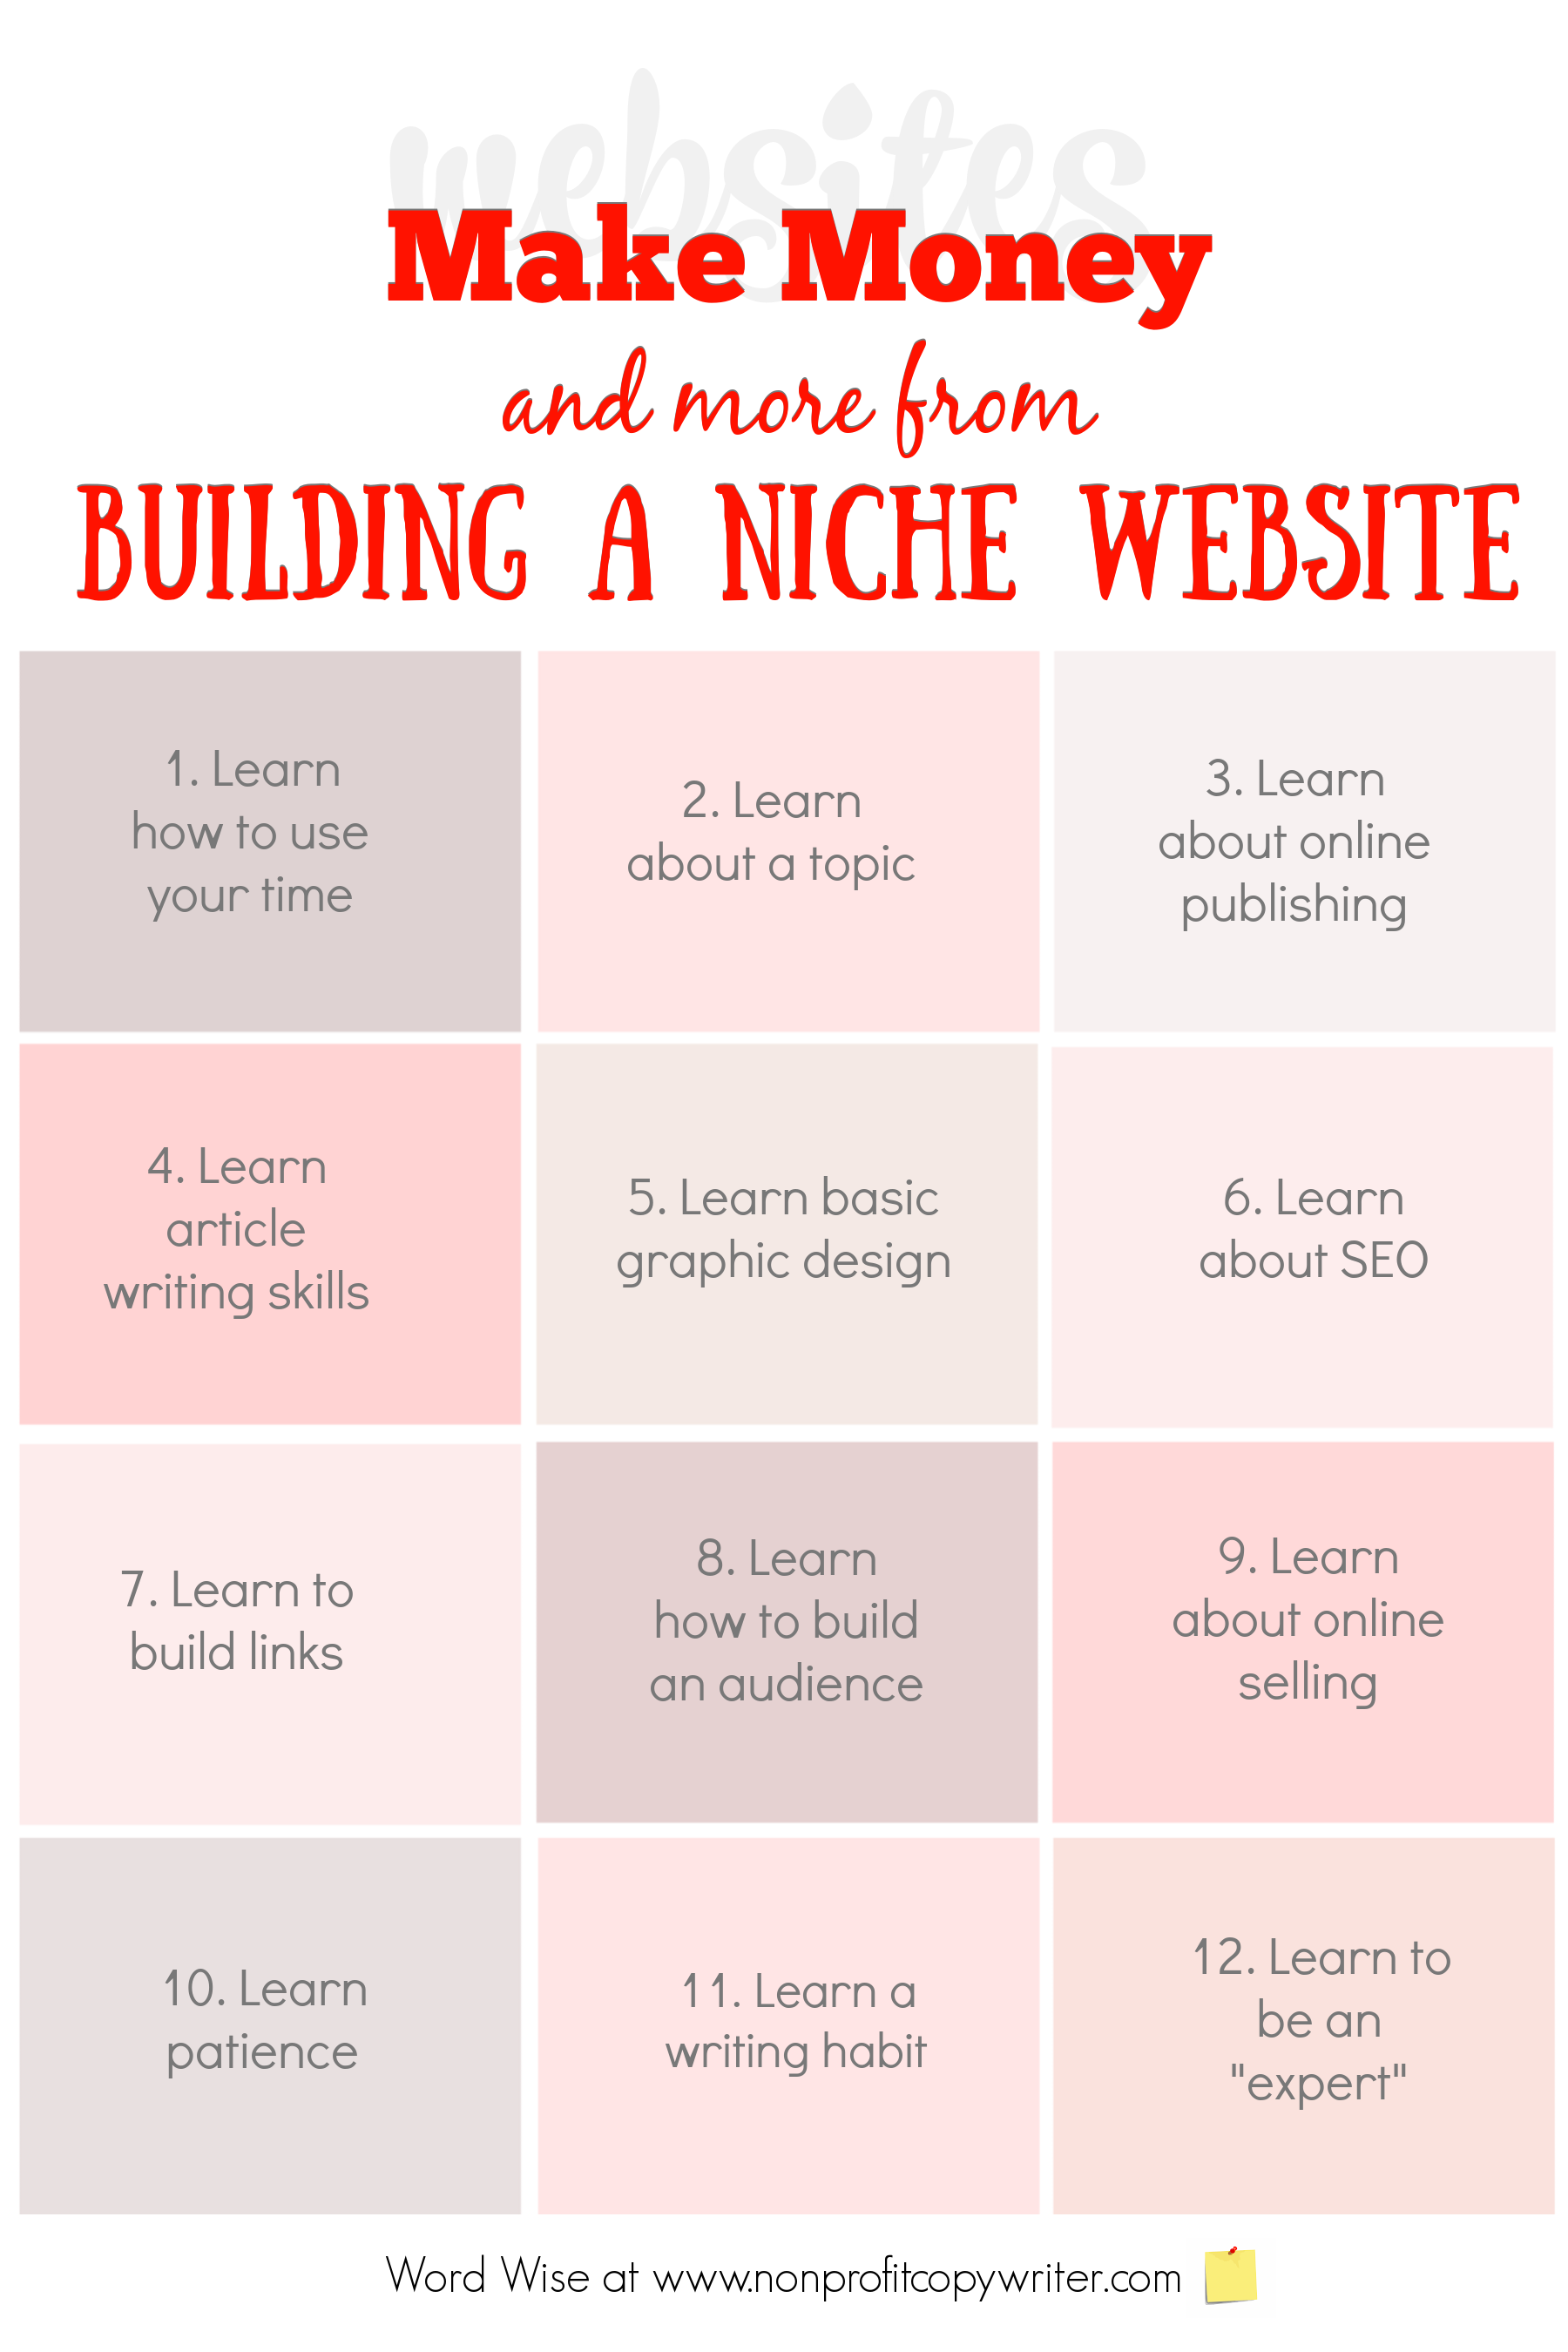 12 things to expect when building a niche website with Word Wise at Nonprofit Copywriter #WebContentWriting #WritingTips